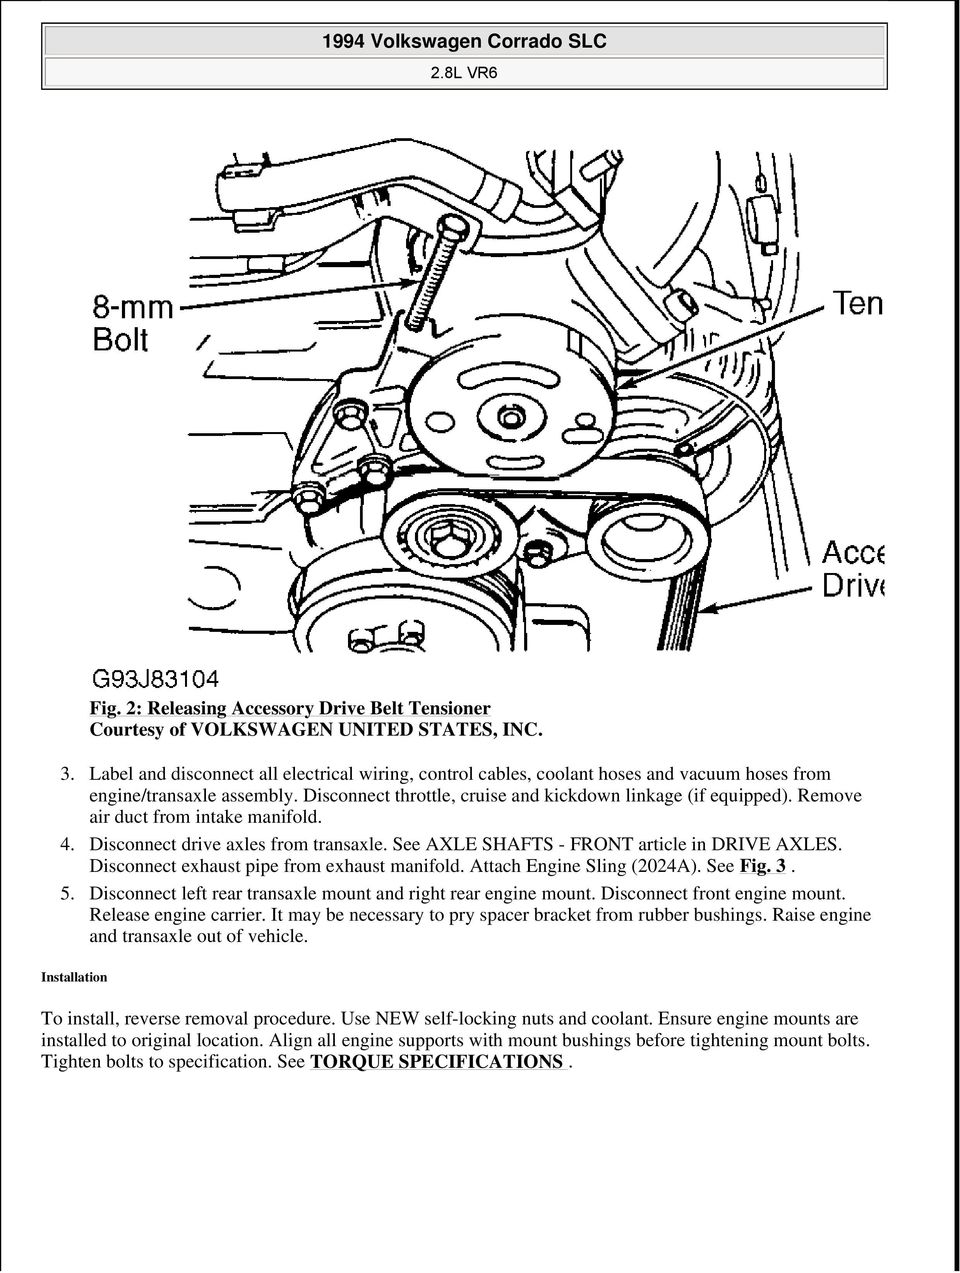 Disconnect exhaust pipe from exhaust manifold. Attach Engine Sling (2024A). See Fig. 3. 5. Disconnect left rear transaxle mount and right rear engine mount. Disconnect front engine mount.